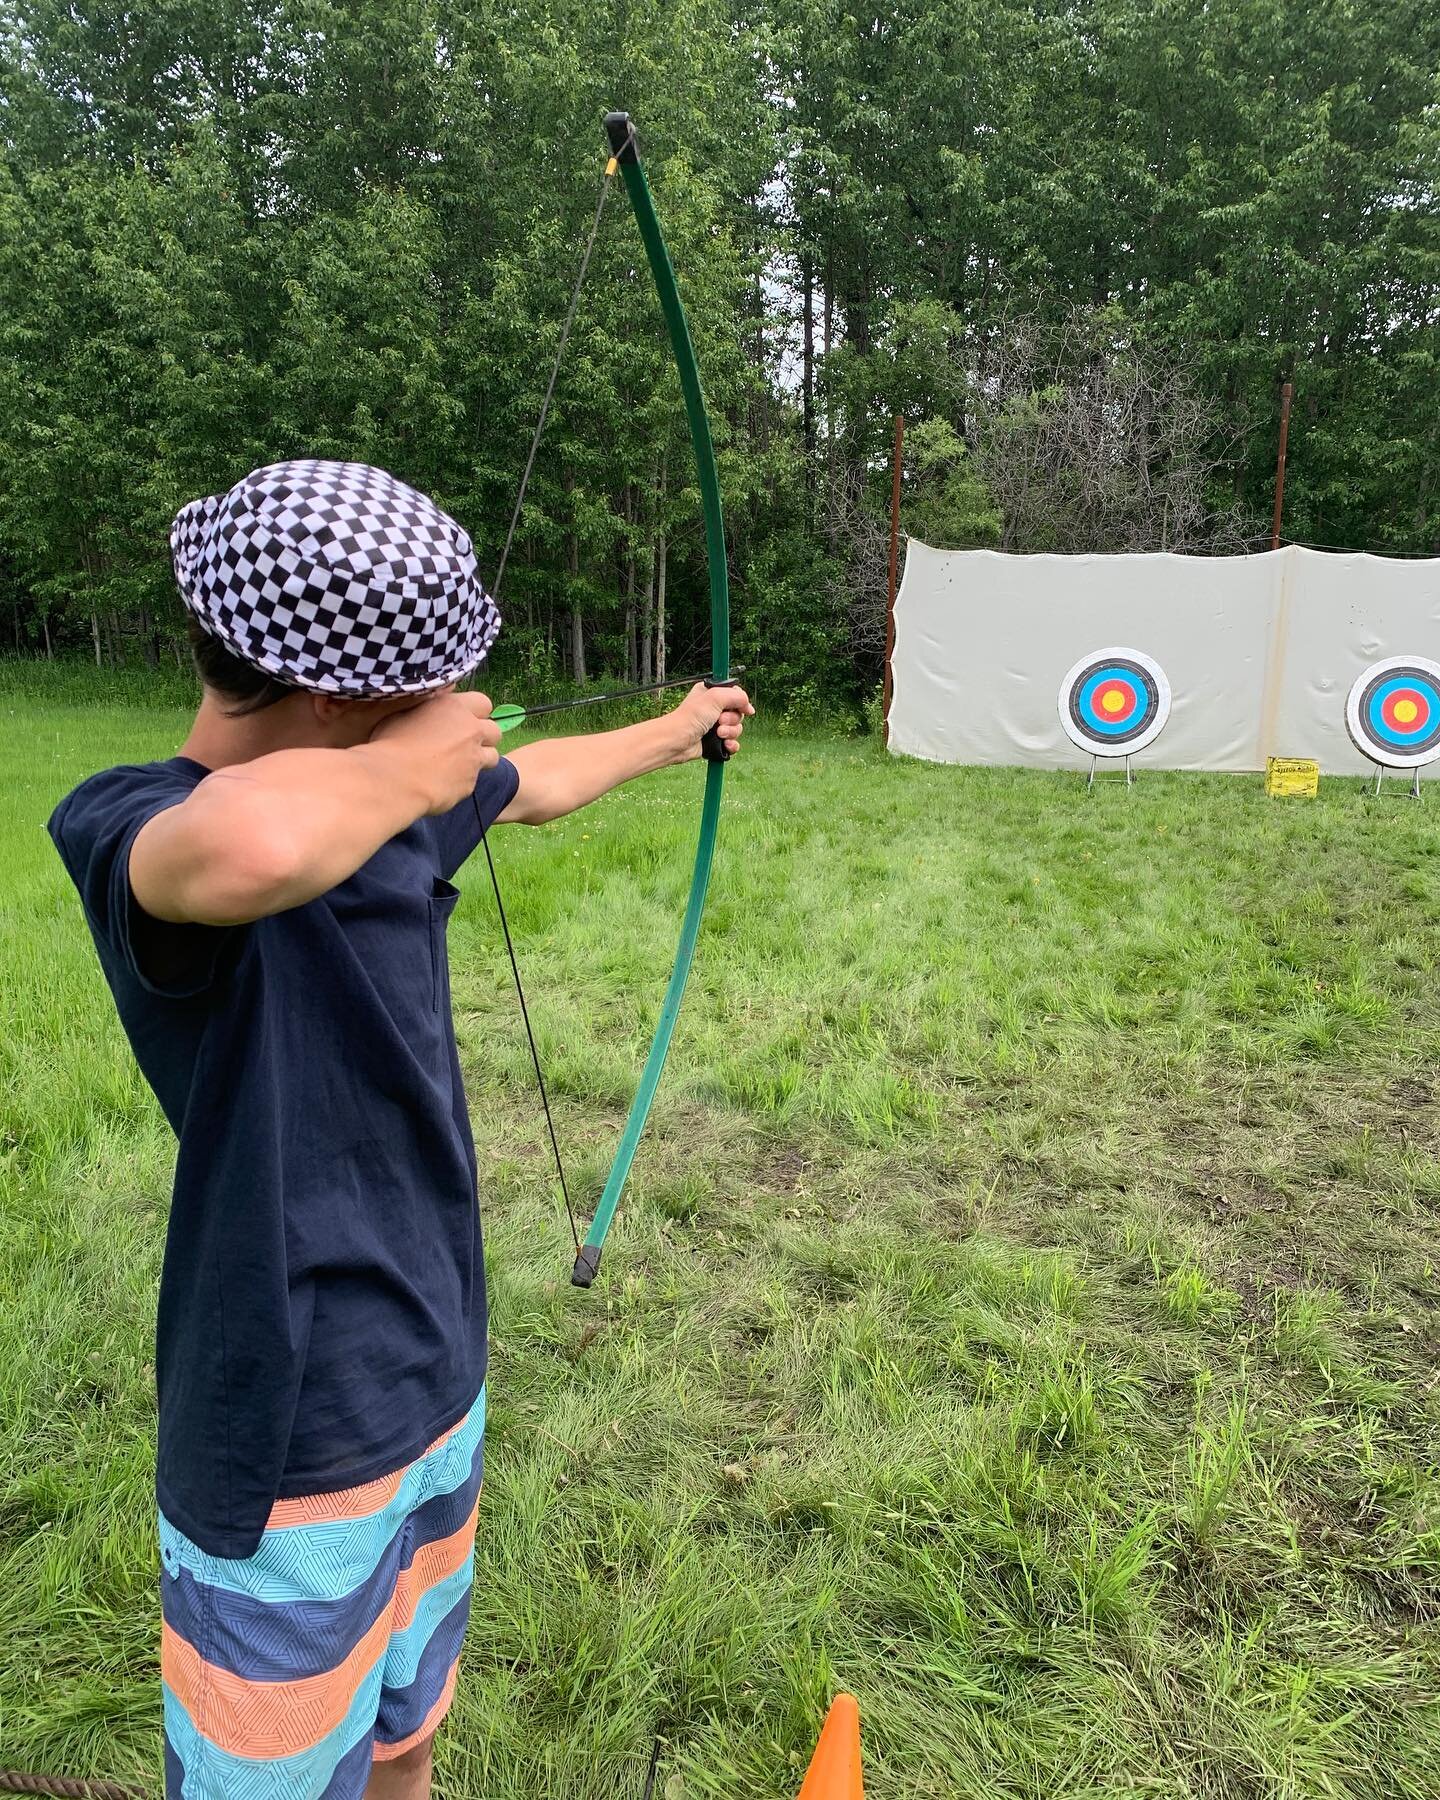 There are less than two months until camp so we need to seriously start ramping up the Top 17 Things We Love About Camp. For 15, it&rsquo;s the satisfying feeling that comes with firing a bow, even when you don&rsquo;t hit the target (but when you do